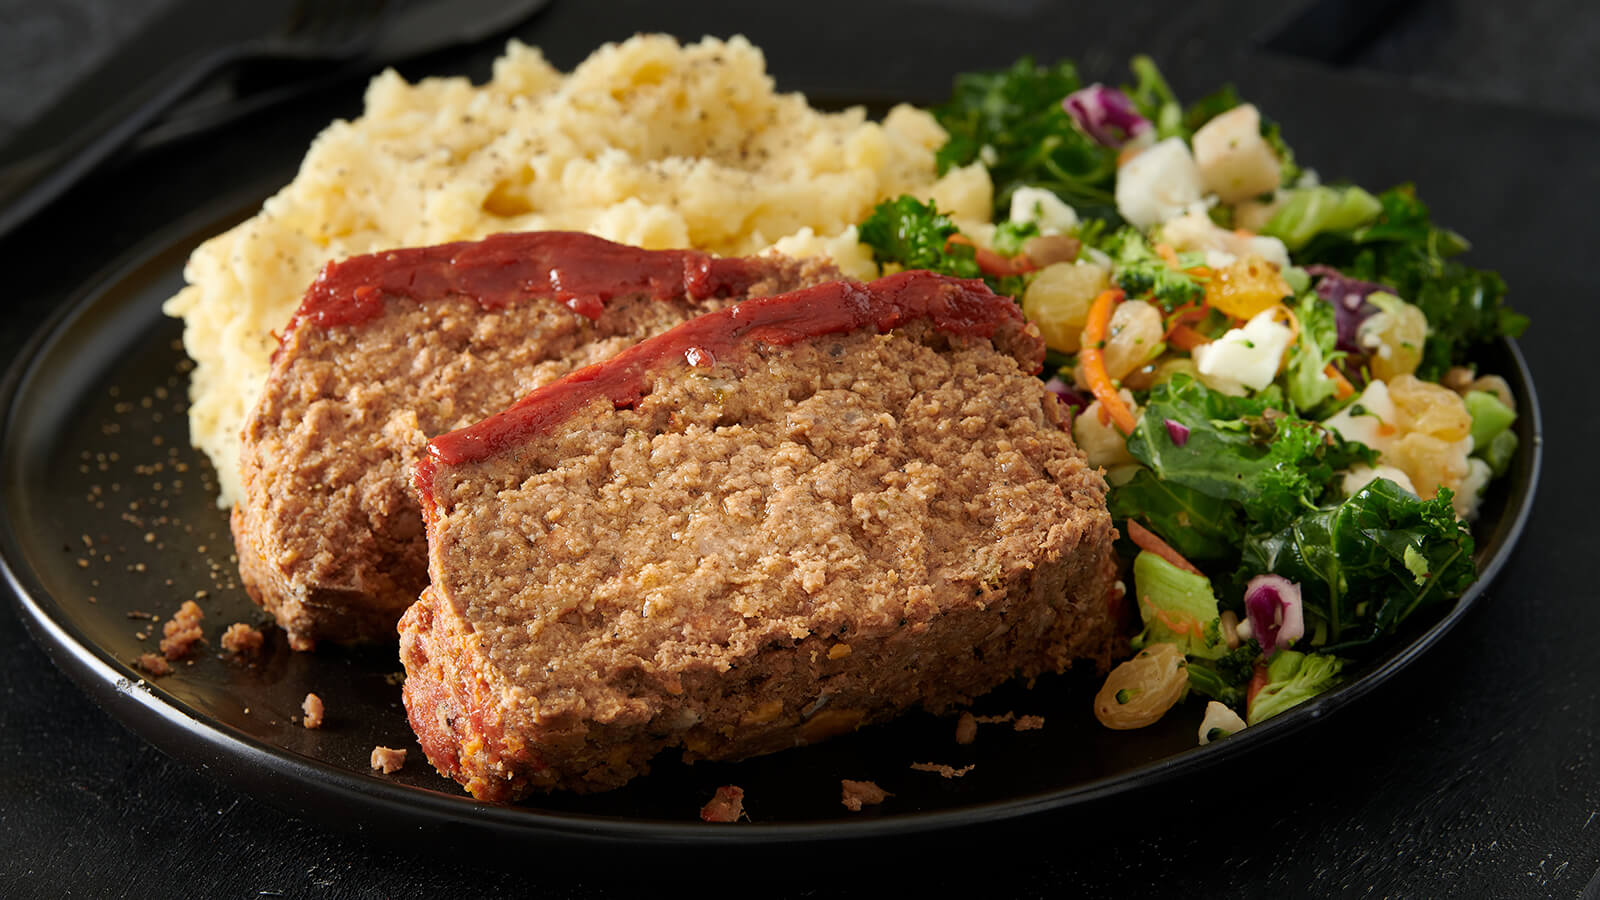 Meatloaf Bistro Meal with mashed potatoes and veggie salad.